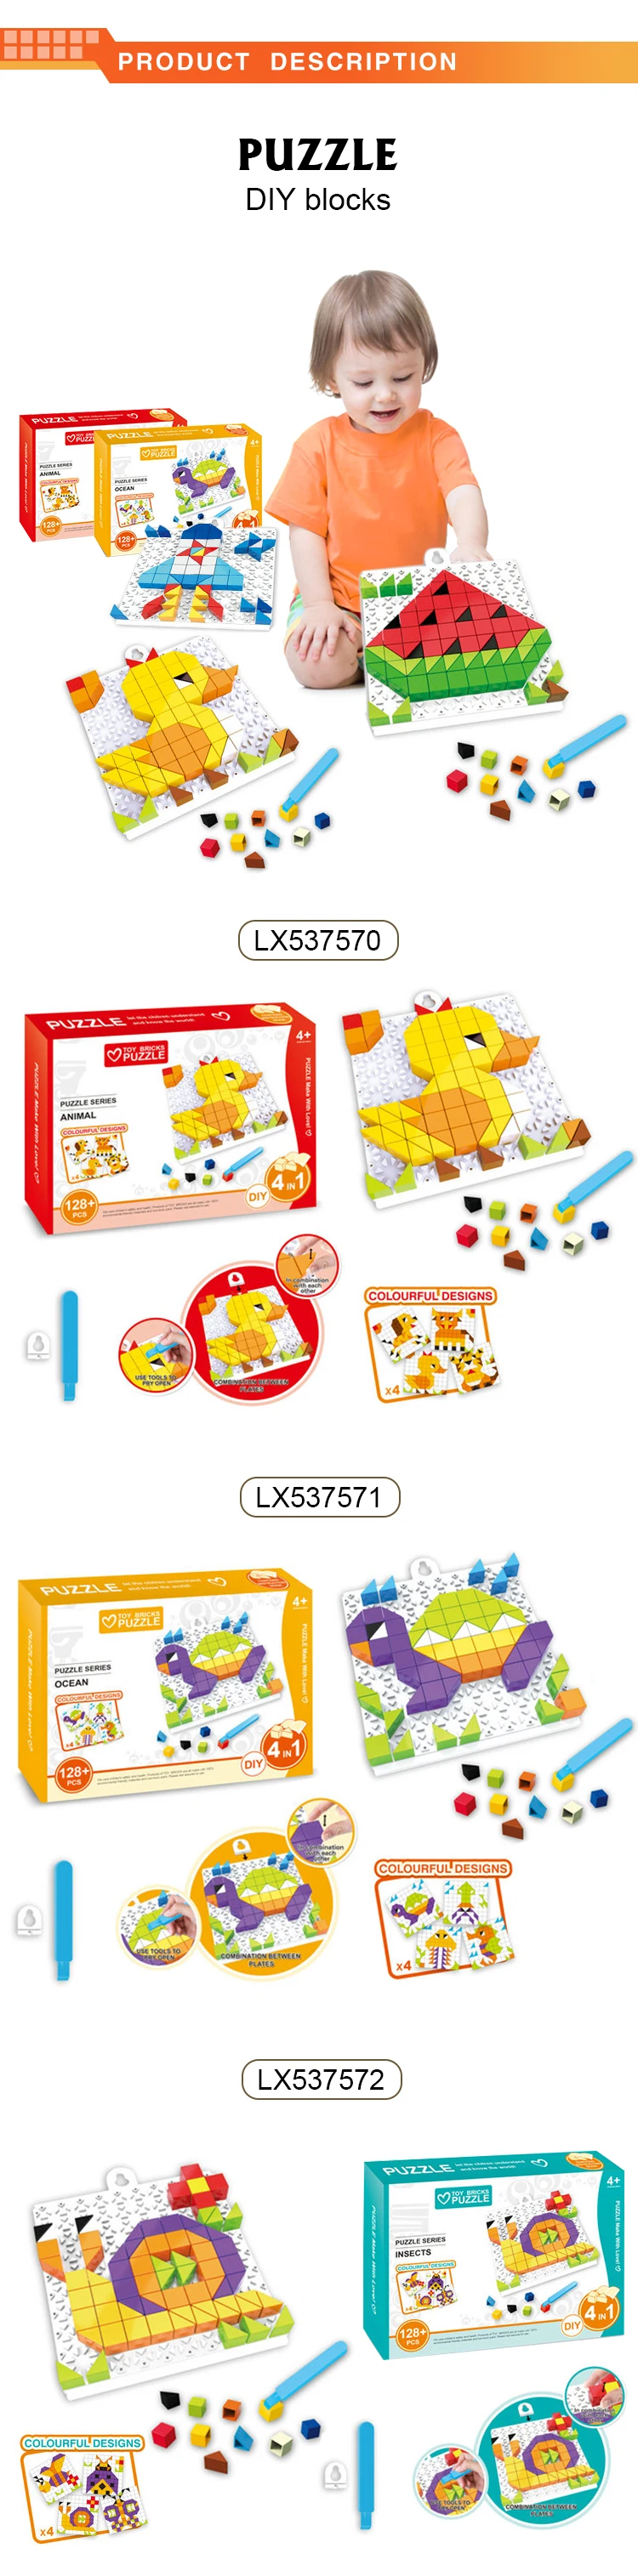 Kids Educational Toys 4 In 1 Plastic 3D Puzzle Funny DIY Toy Brick Puzzle